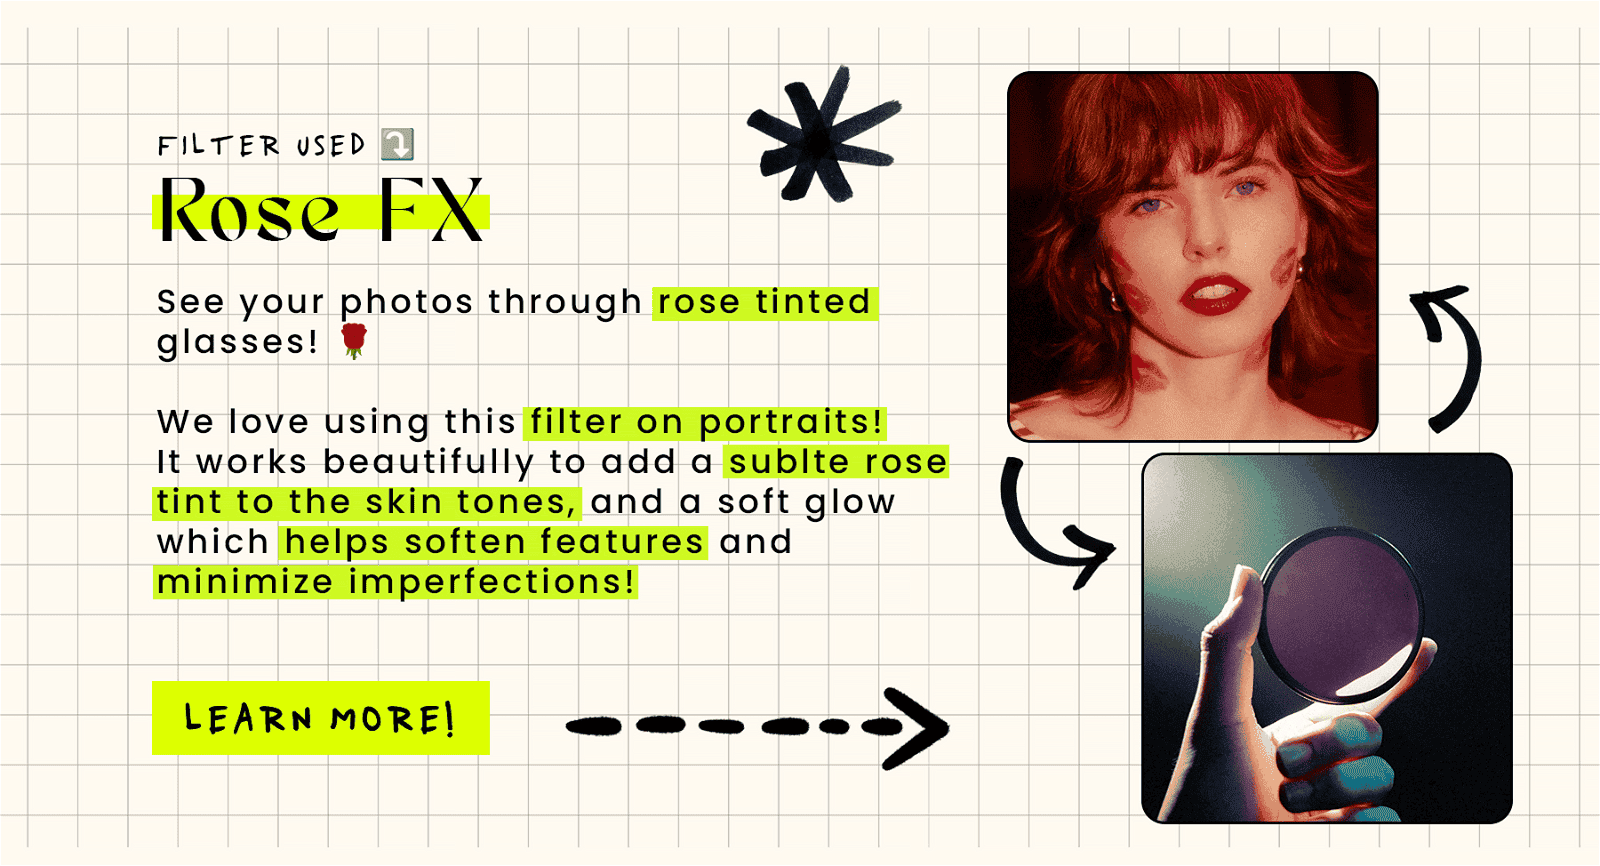 The Rose FX filter is perfect for portraits!